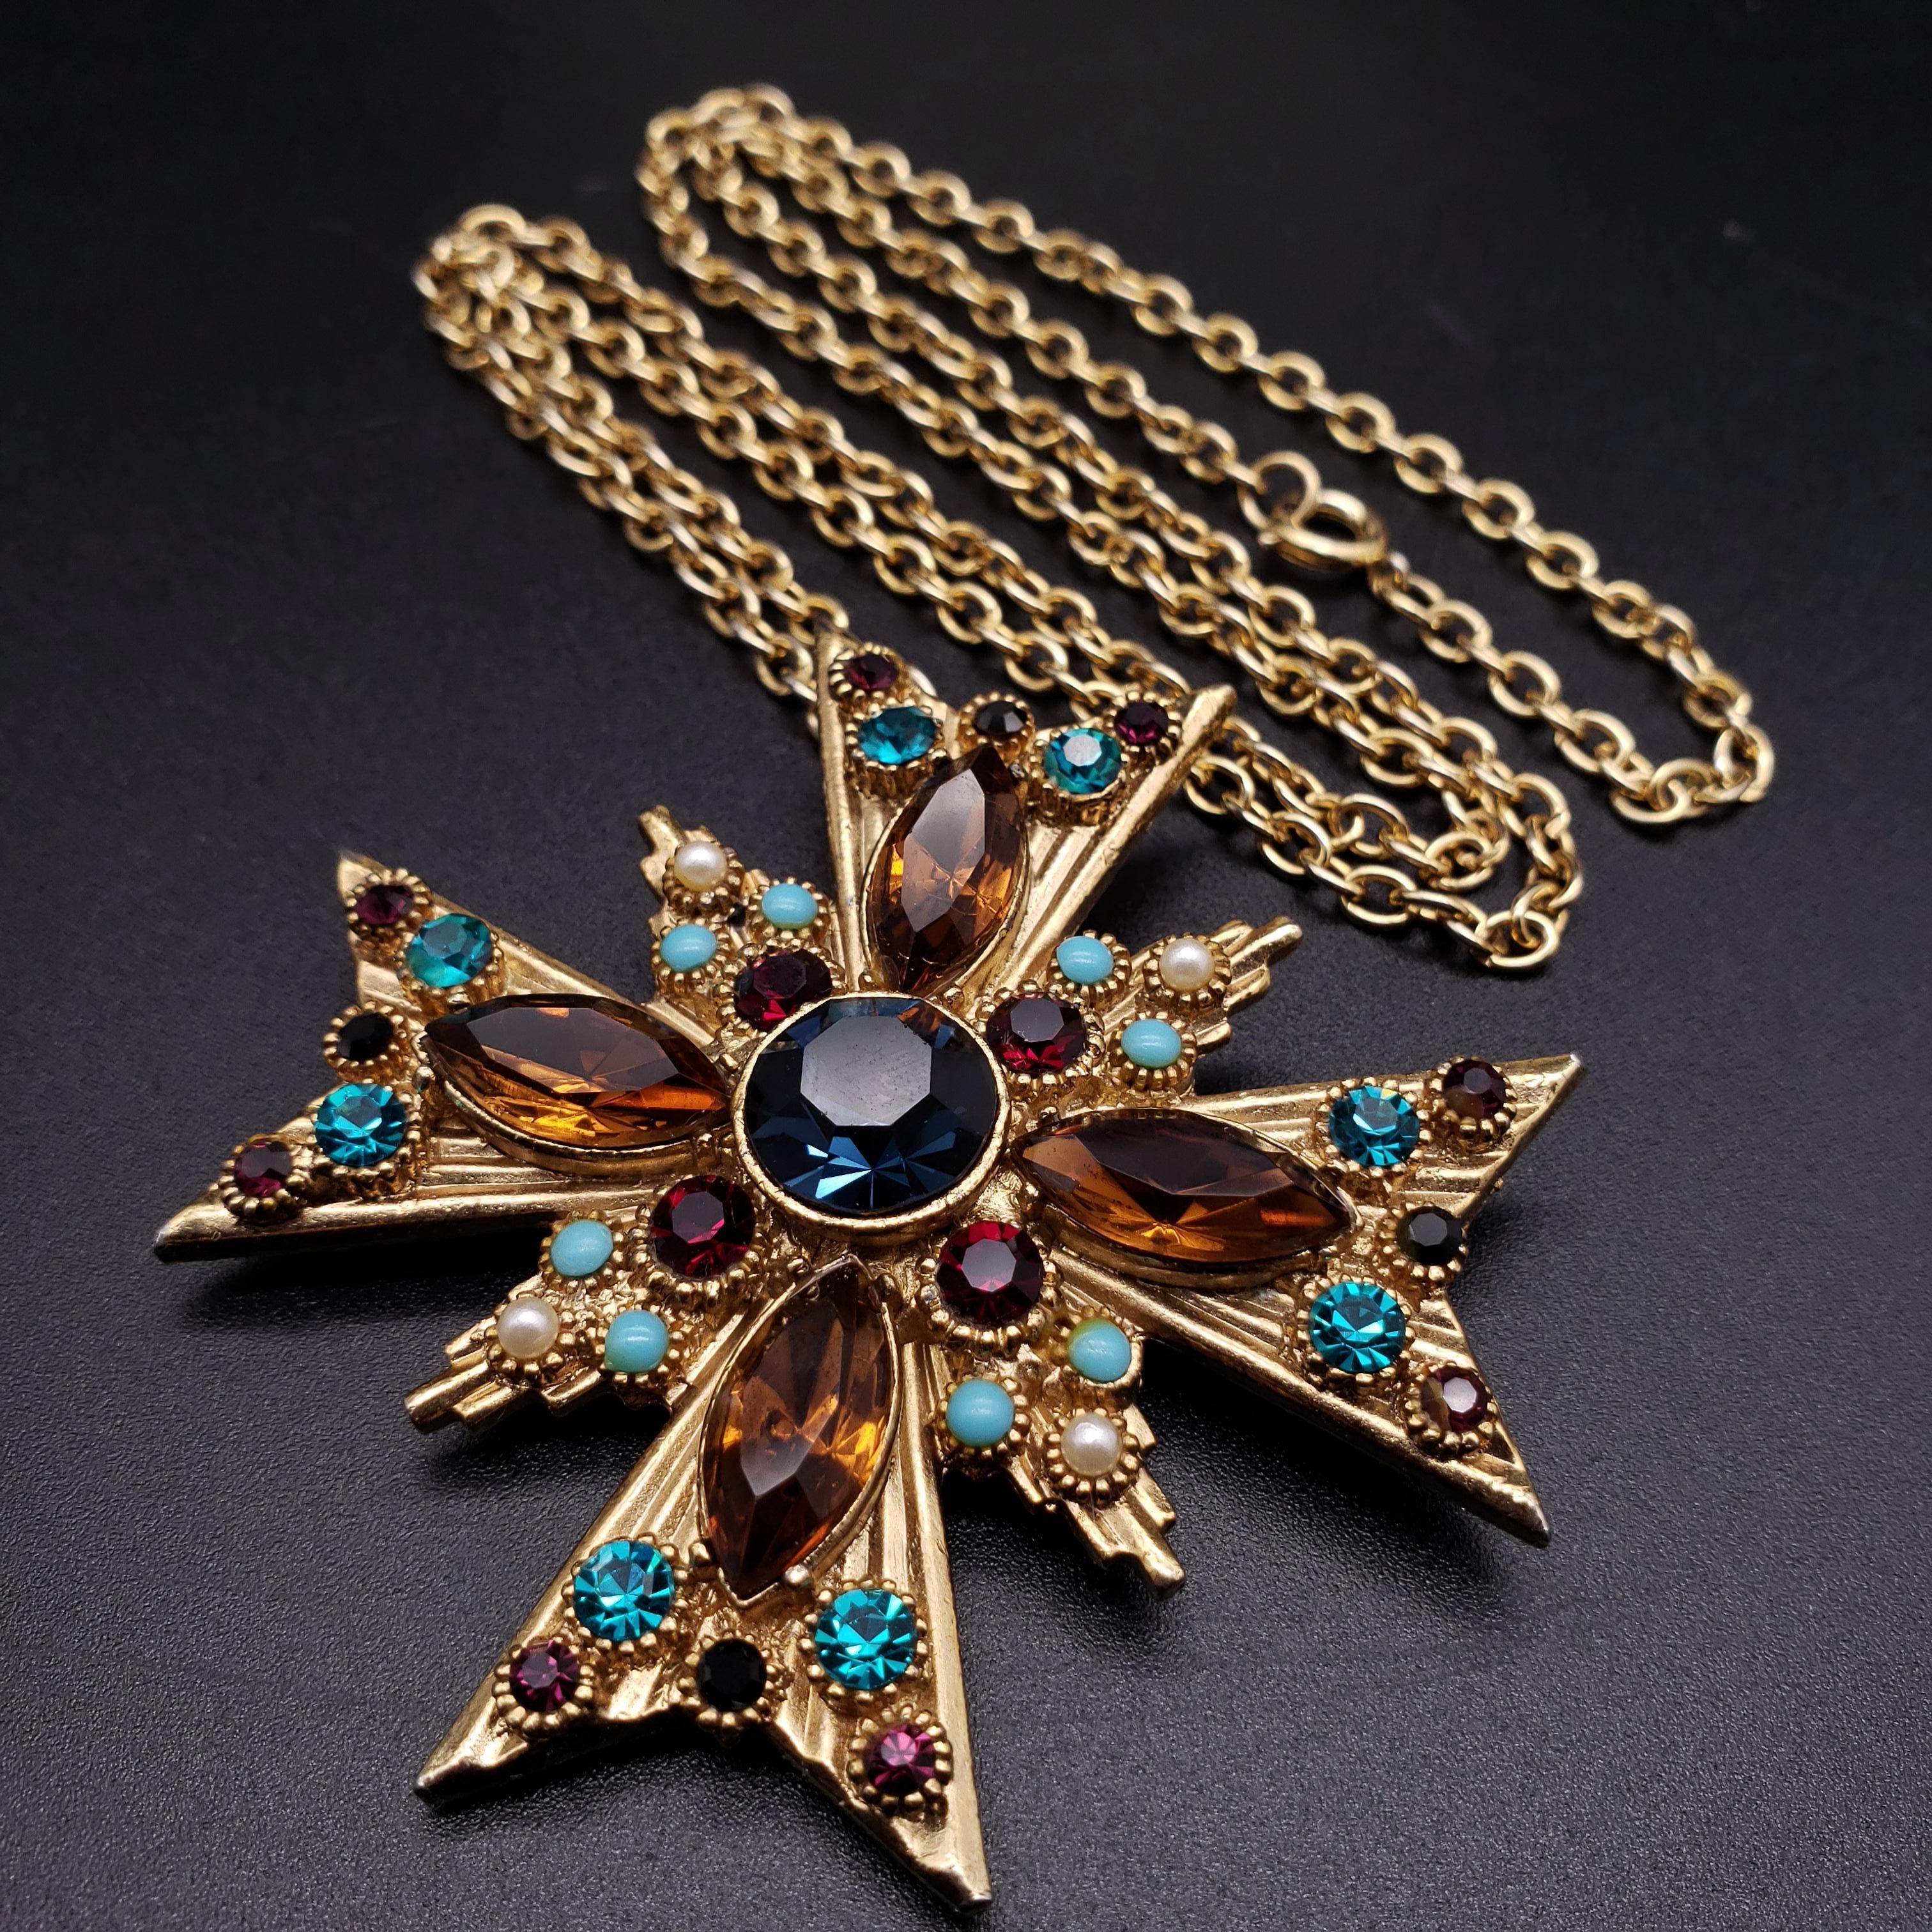 This glamorous 20th century Maltese cross pin pendant chain necklace is decorated with ruby, aquamarine, and topaz emerald crystals. 
For a sophisticated and stylish look!
There's some metal wear on the pendant bail.
Gold-plated. Made by